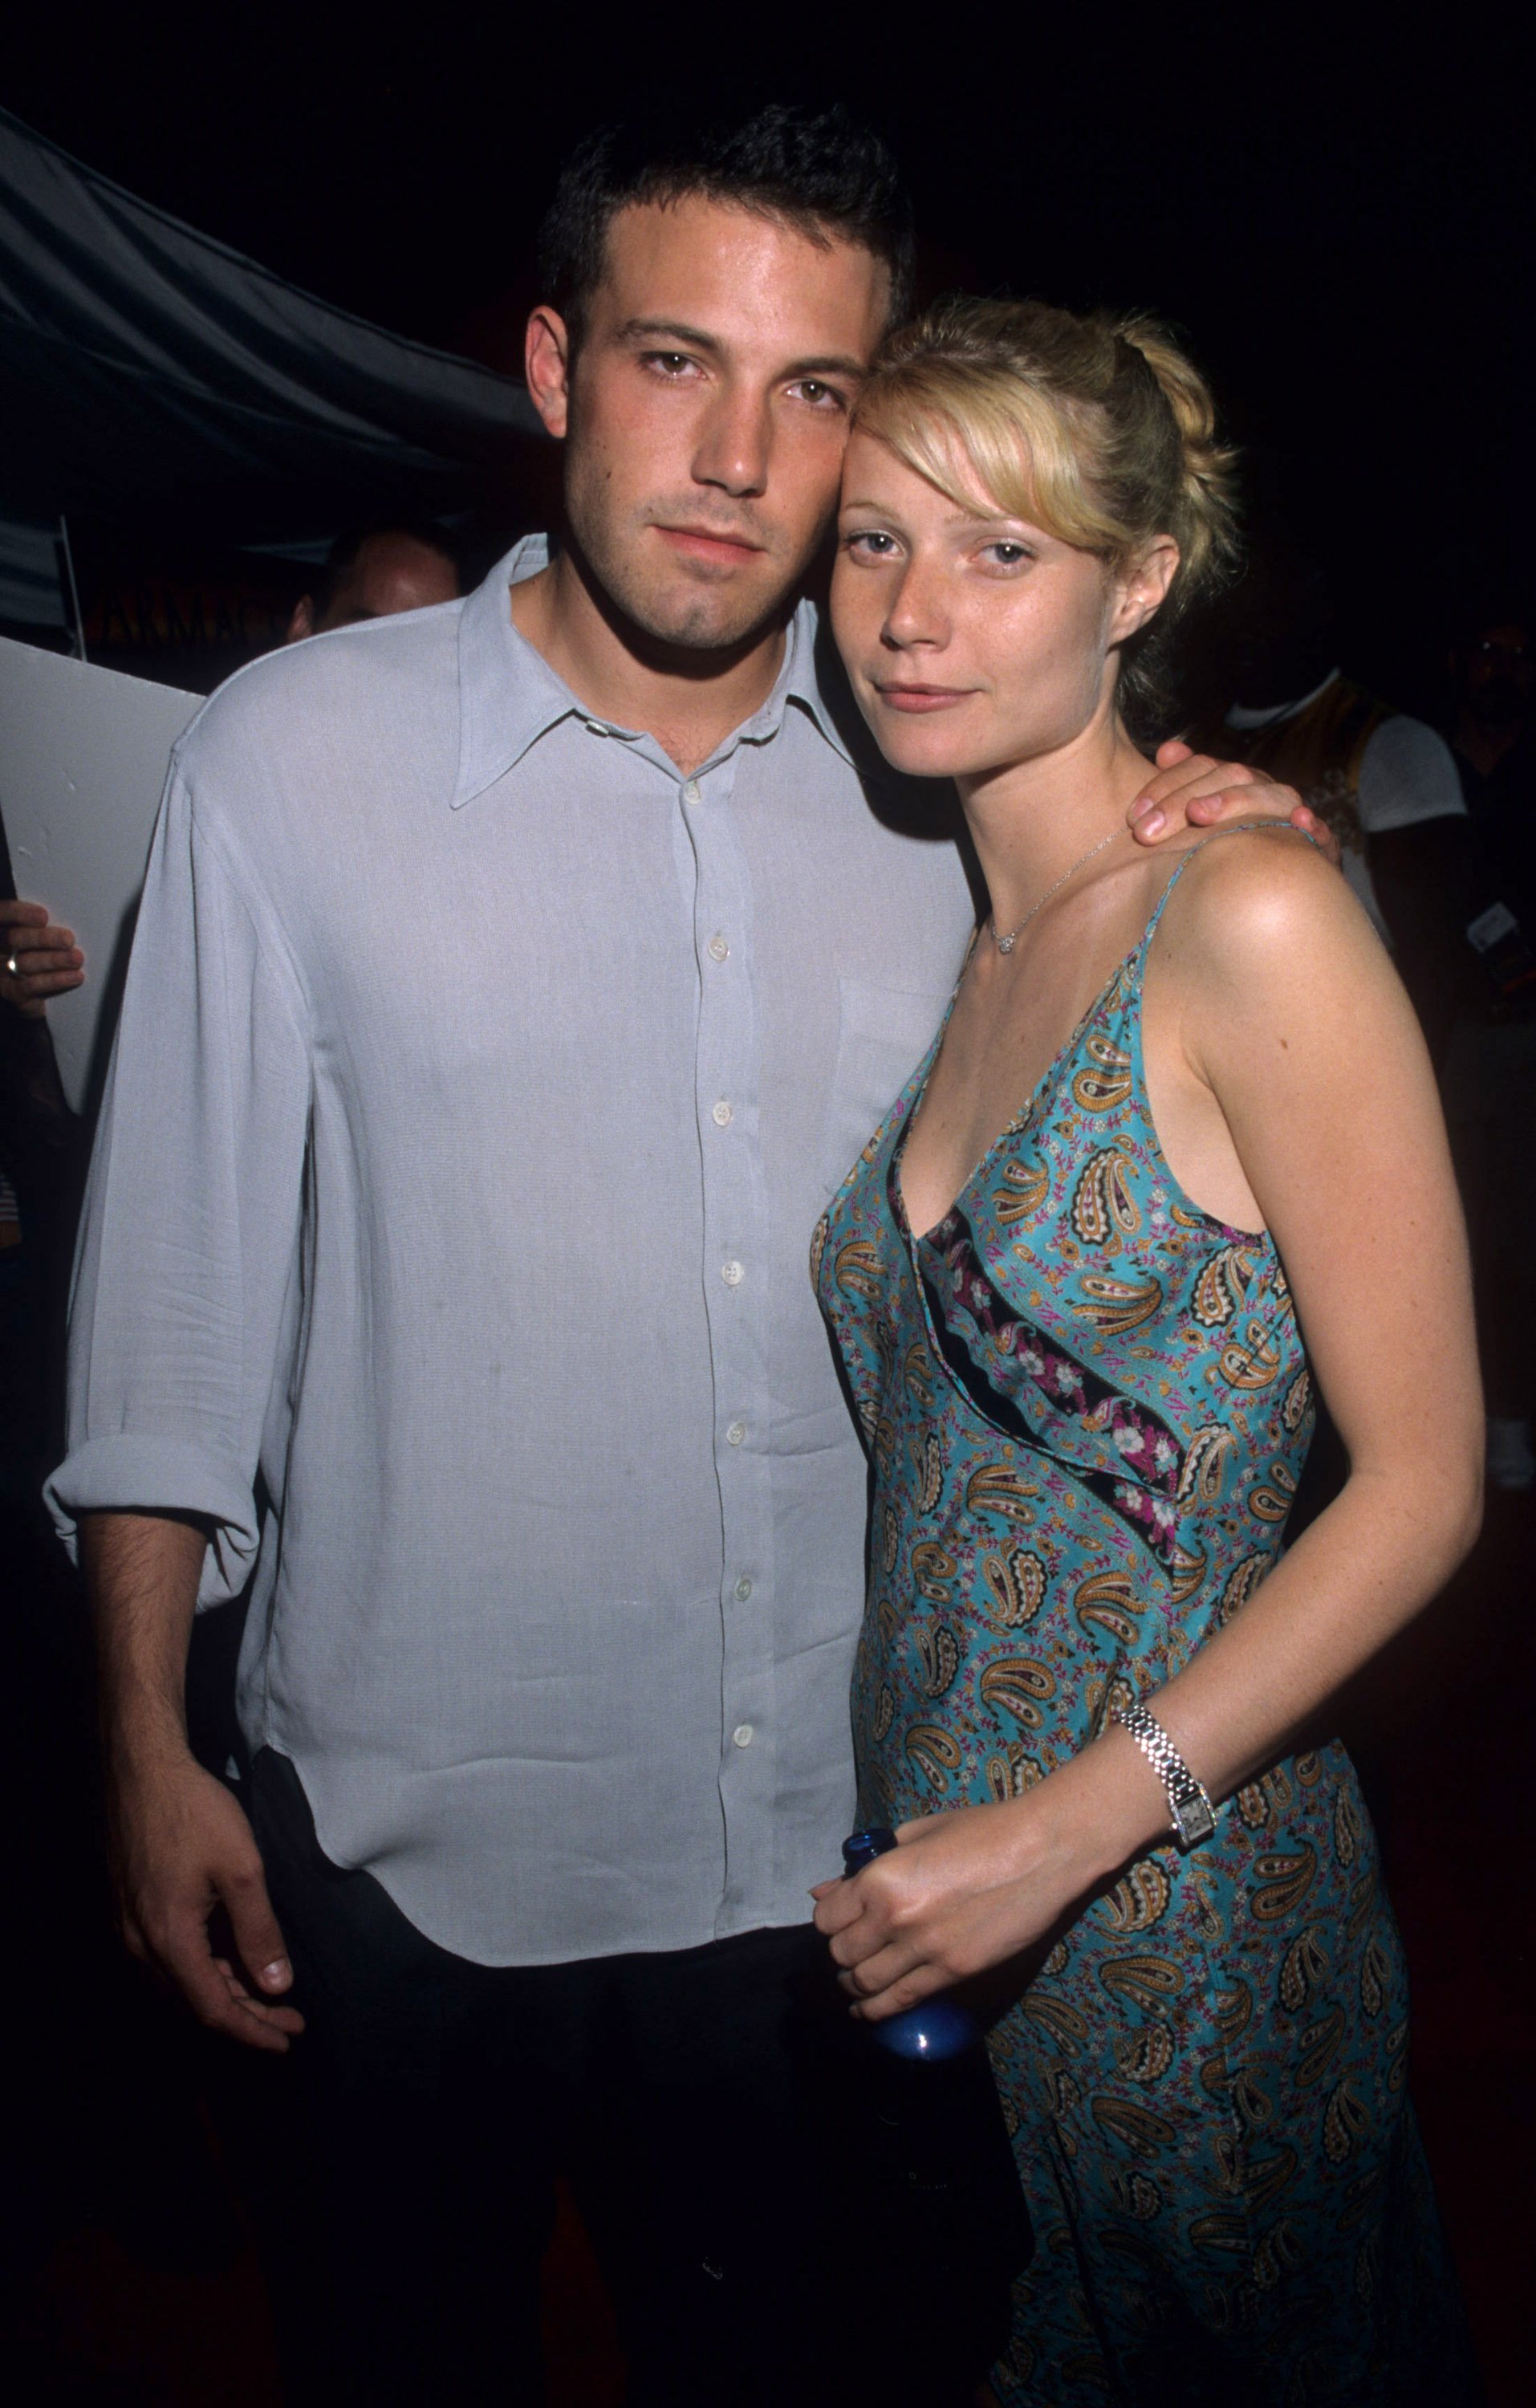 Ben Affleck and Gwyneth Paltrow at the premiere of 'Armageddon' 